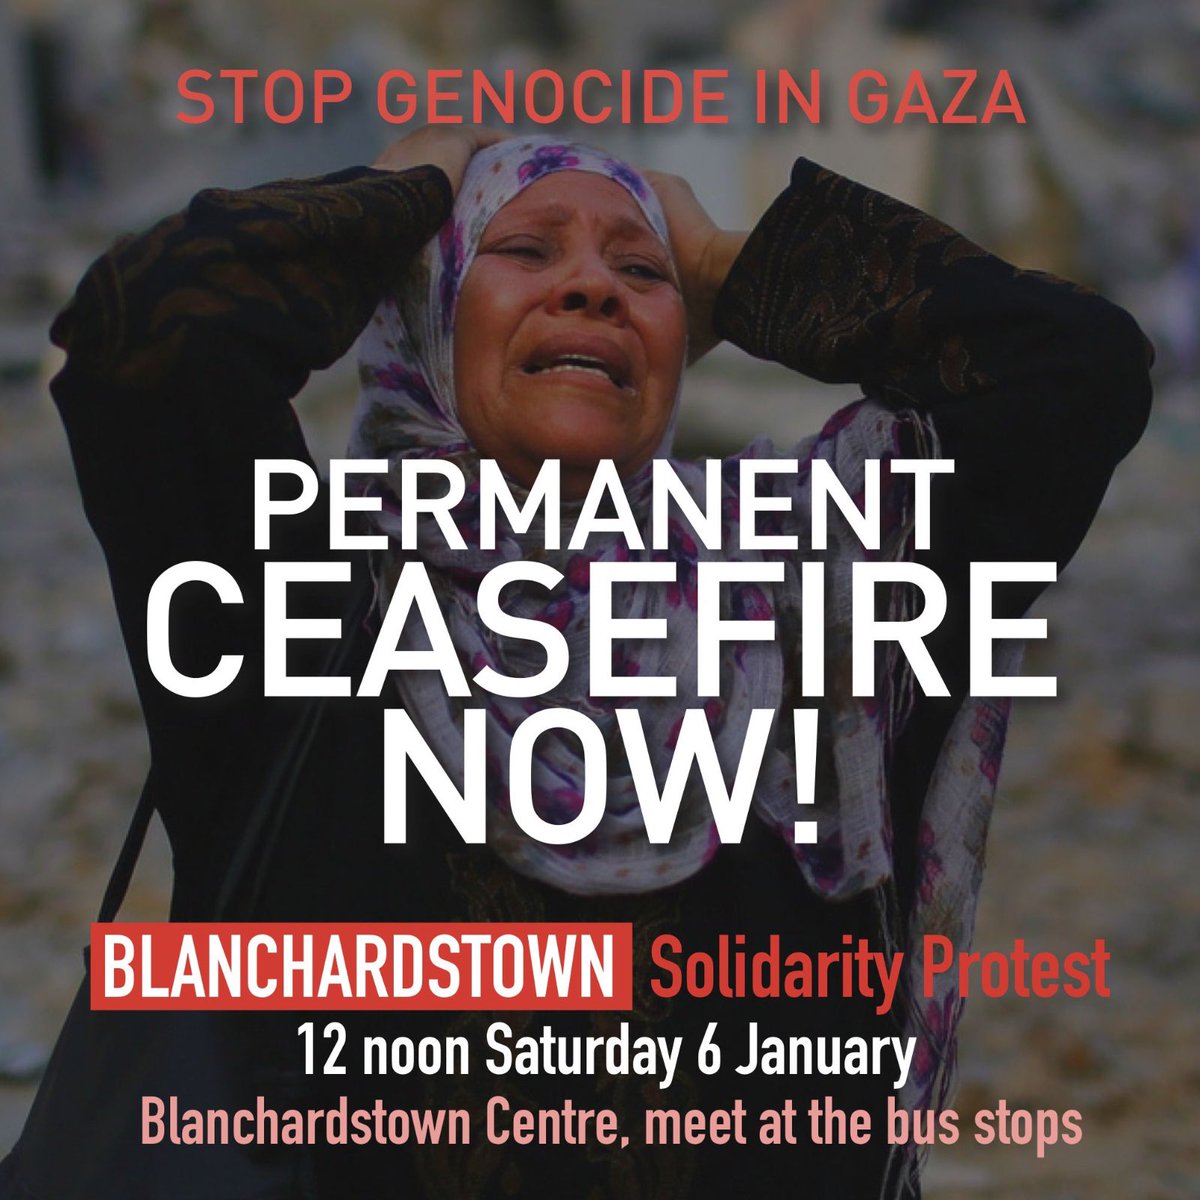 Join us Saturday #Blanchardstown #StopGazaGenocide #dubw